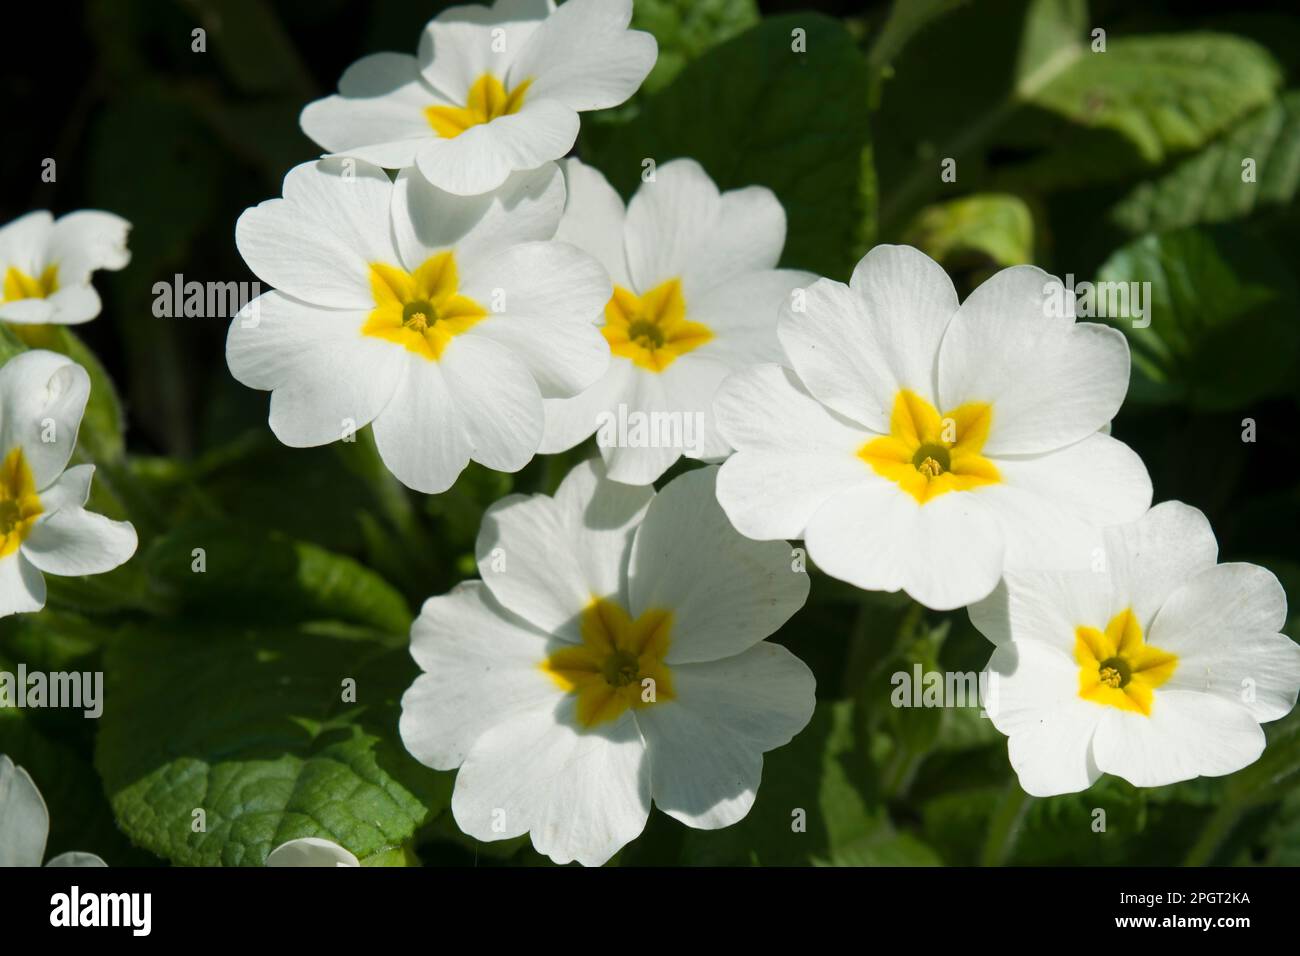 Primula vulgaris, the common primrose, English primrose,  a flowering plant among the first to appear in spring. Delicately scented white flowers. Stock Photo